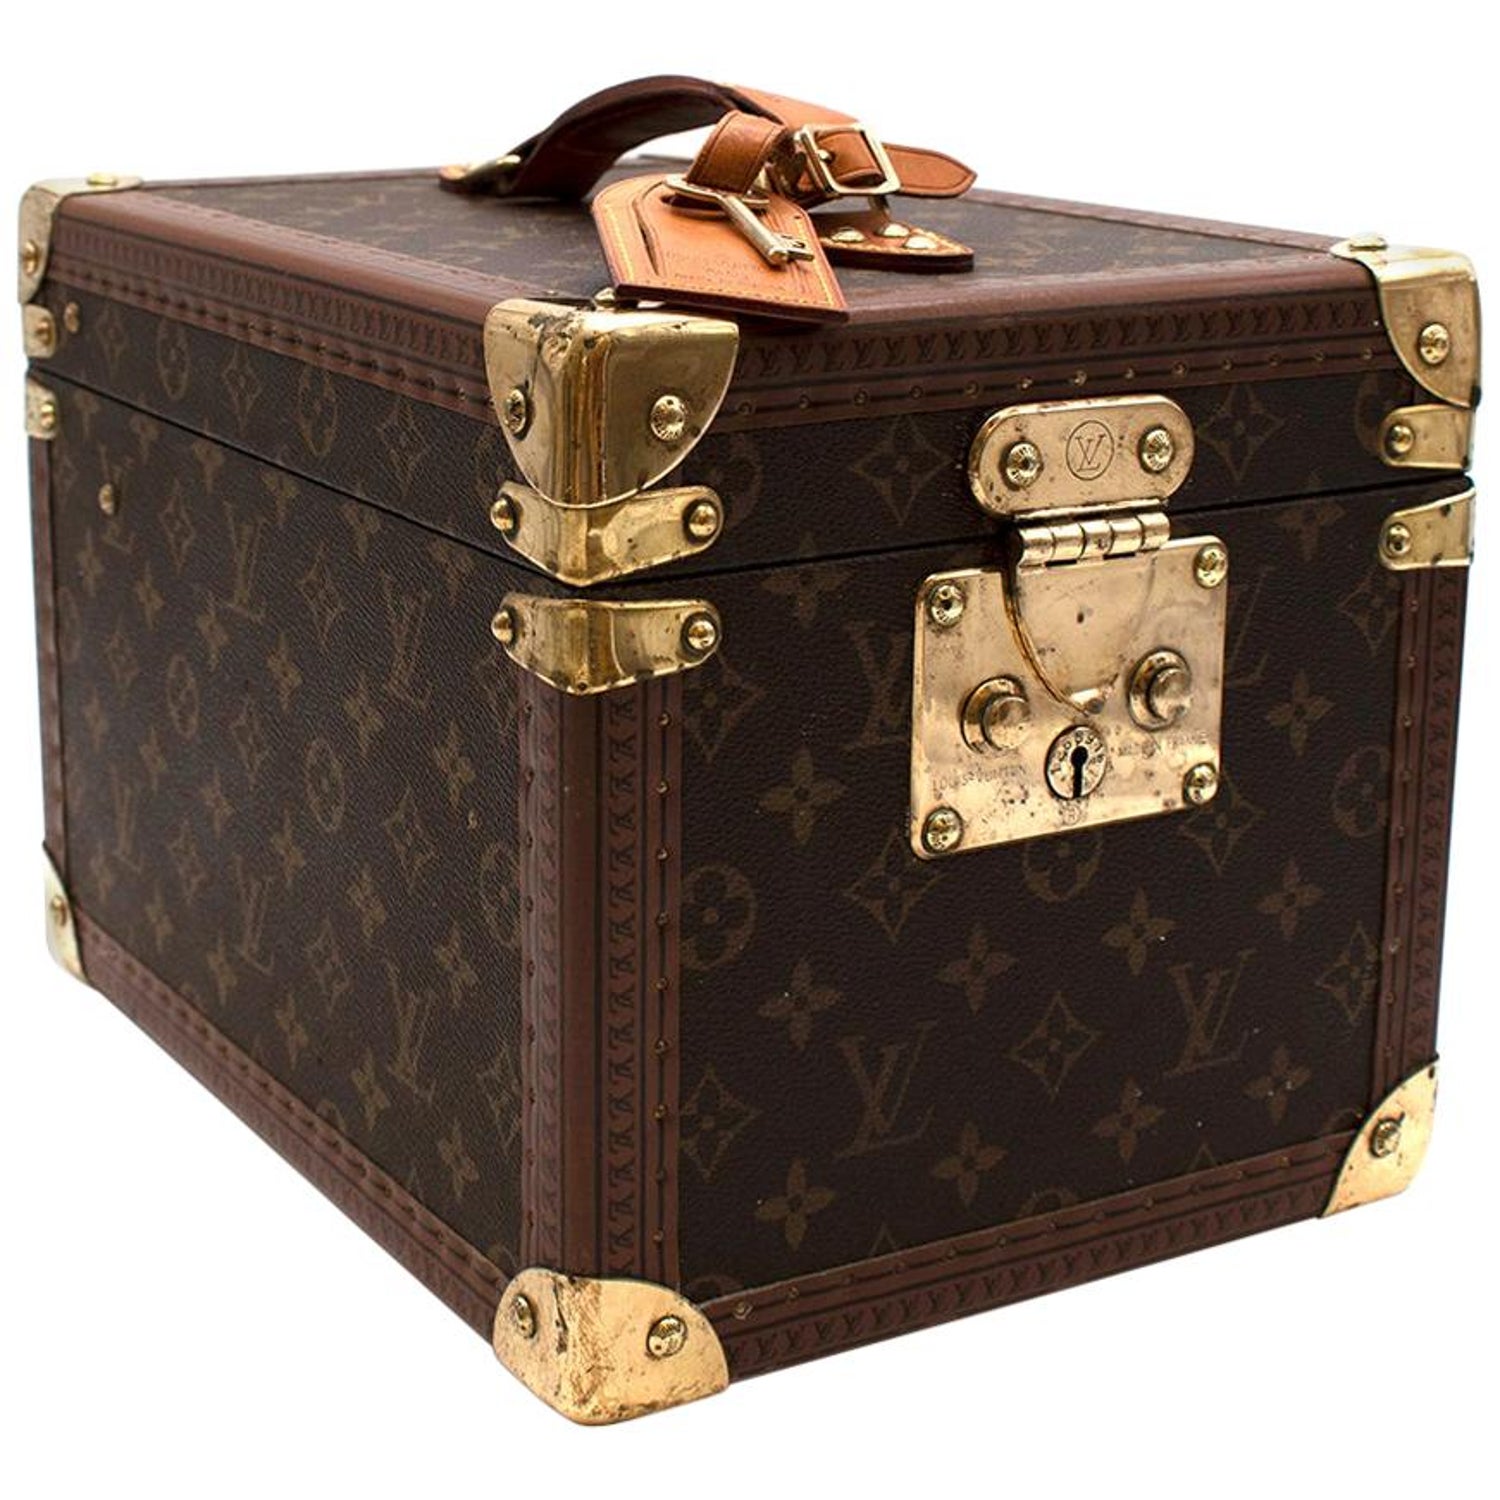 Louis Vuitton Vanity Trunk - 2 For Sale on 1stDibs